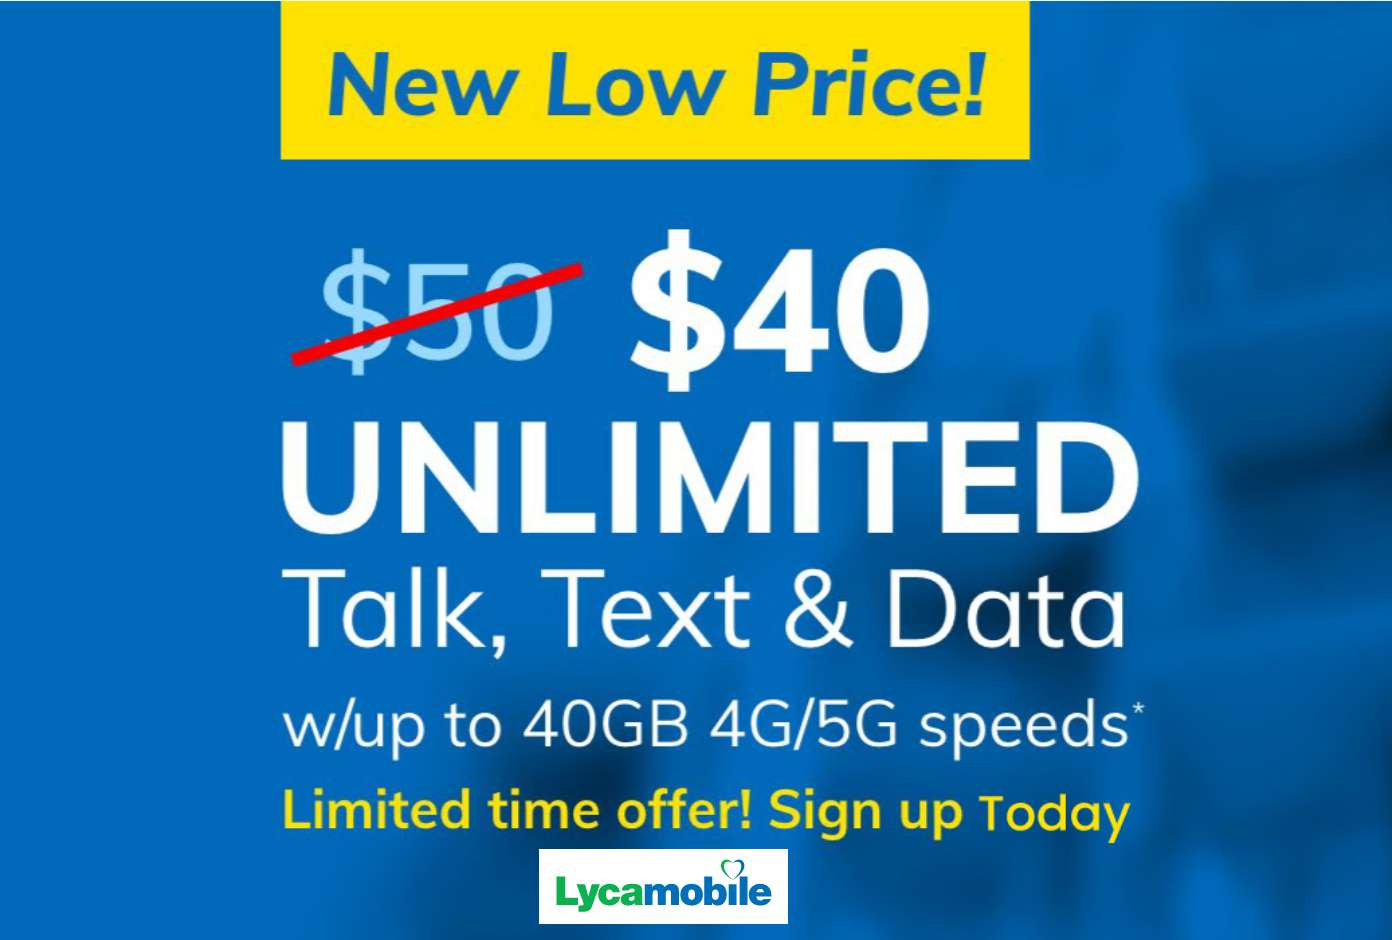 Lycamobile Limited Time Offer Is Unlimited Plan Discount